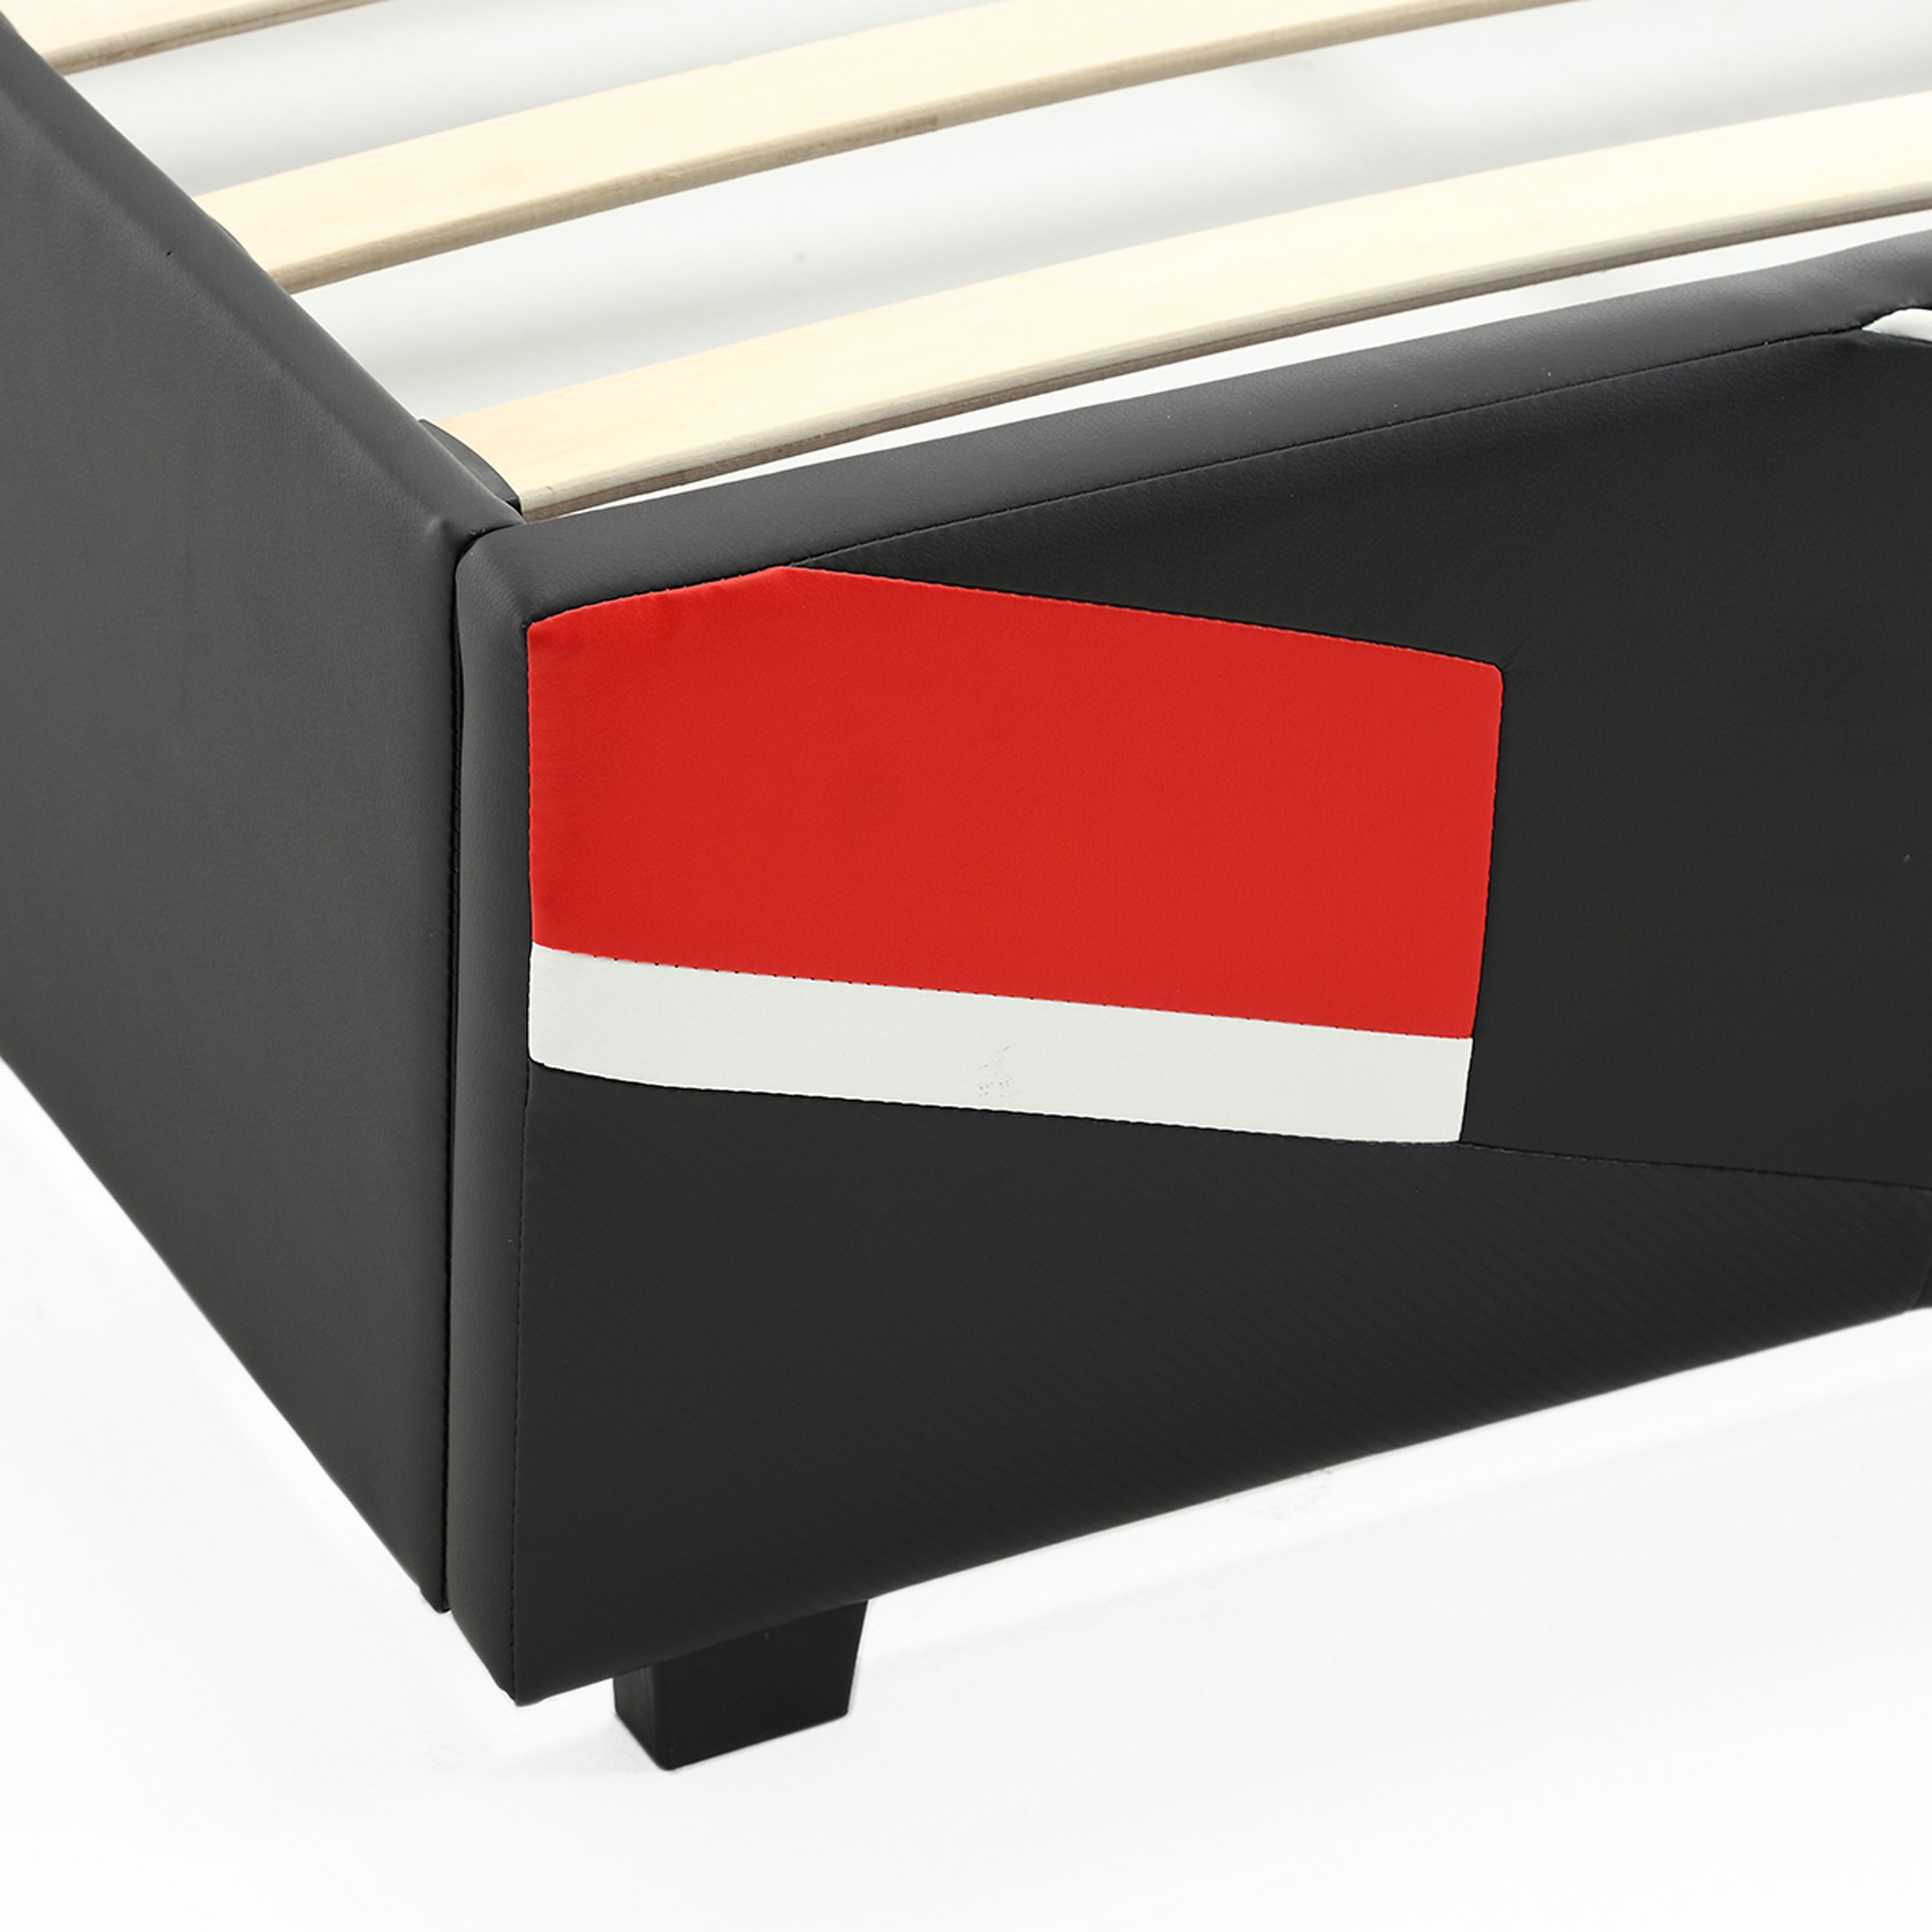 Orion eSports Gaming Bed Frame, Black/Red, Twin